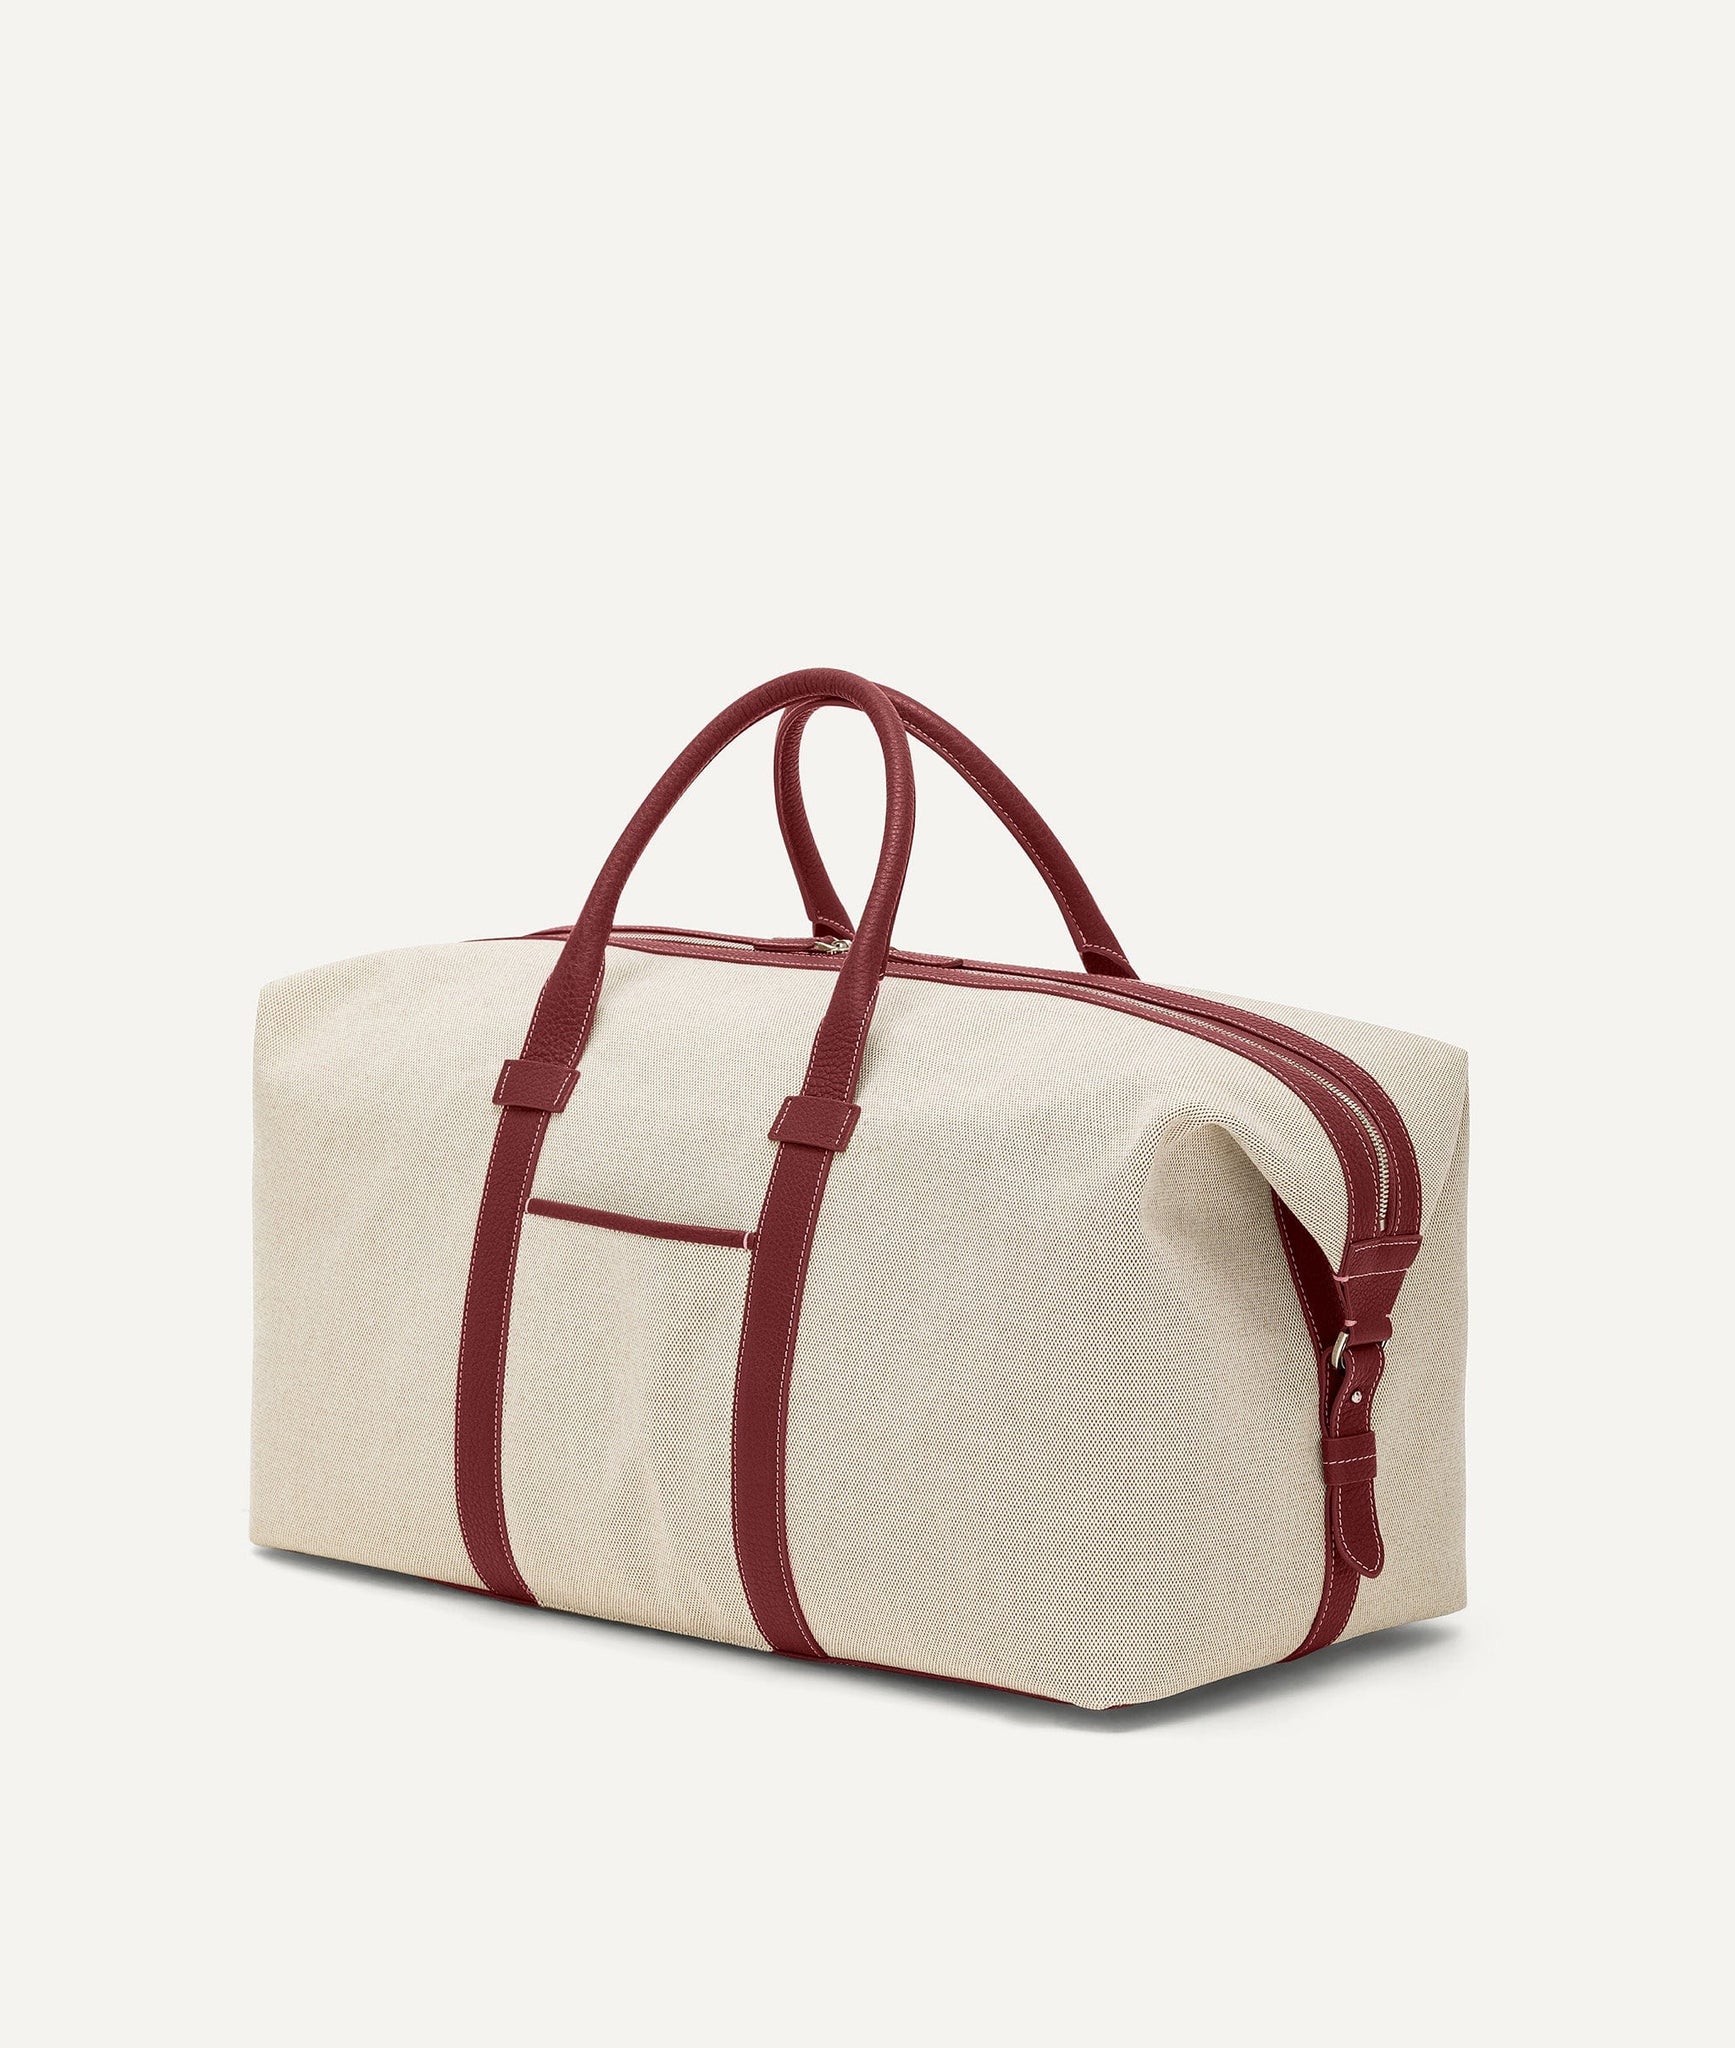 Duffle Bag in Canvas and Calf Leather